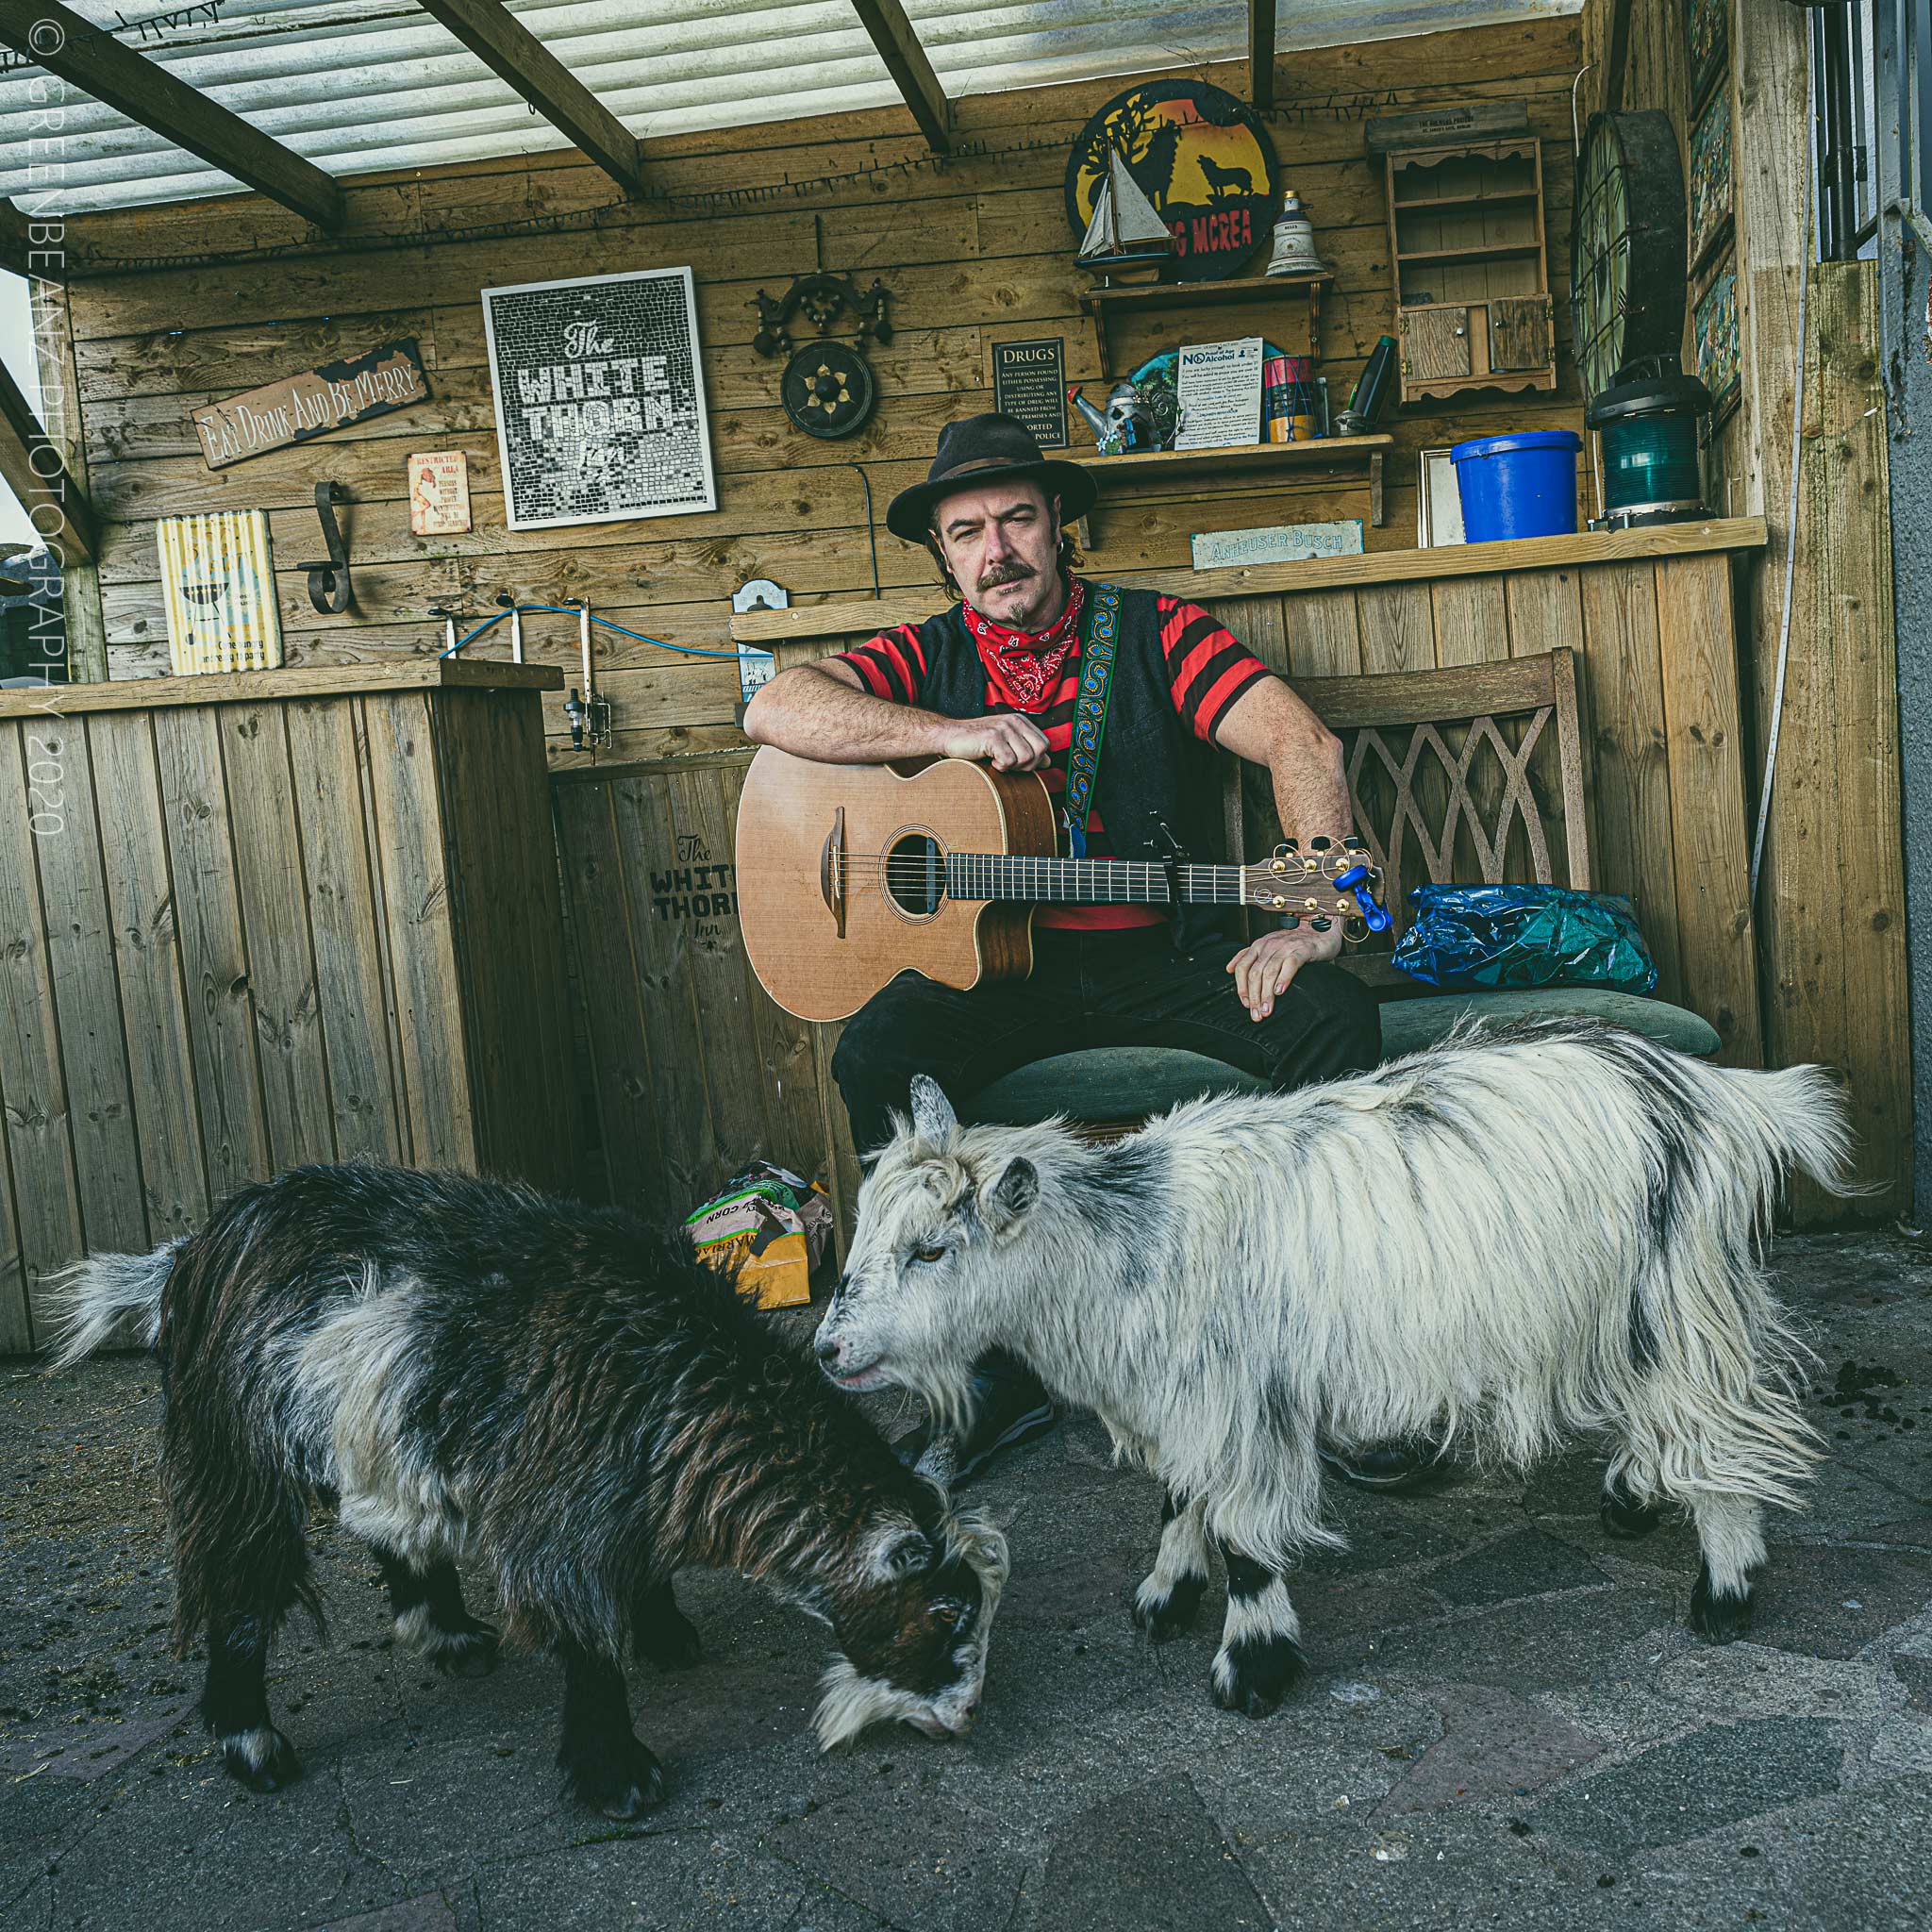 Mike 'Mad Dog' Mathieson -Mad Dog Mcrea and Landlord of The White Thorn with his goats 'Gin and Tonic' part of 2020's 'MUTED-Musicians Under Lockdown'